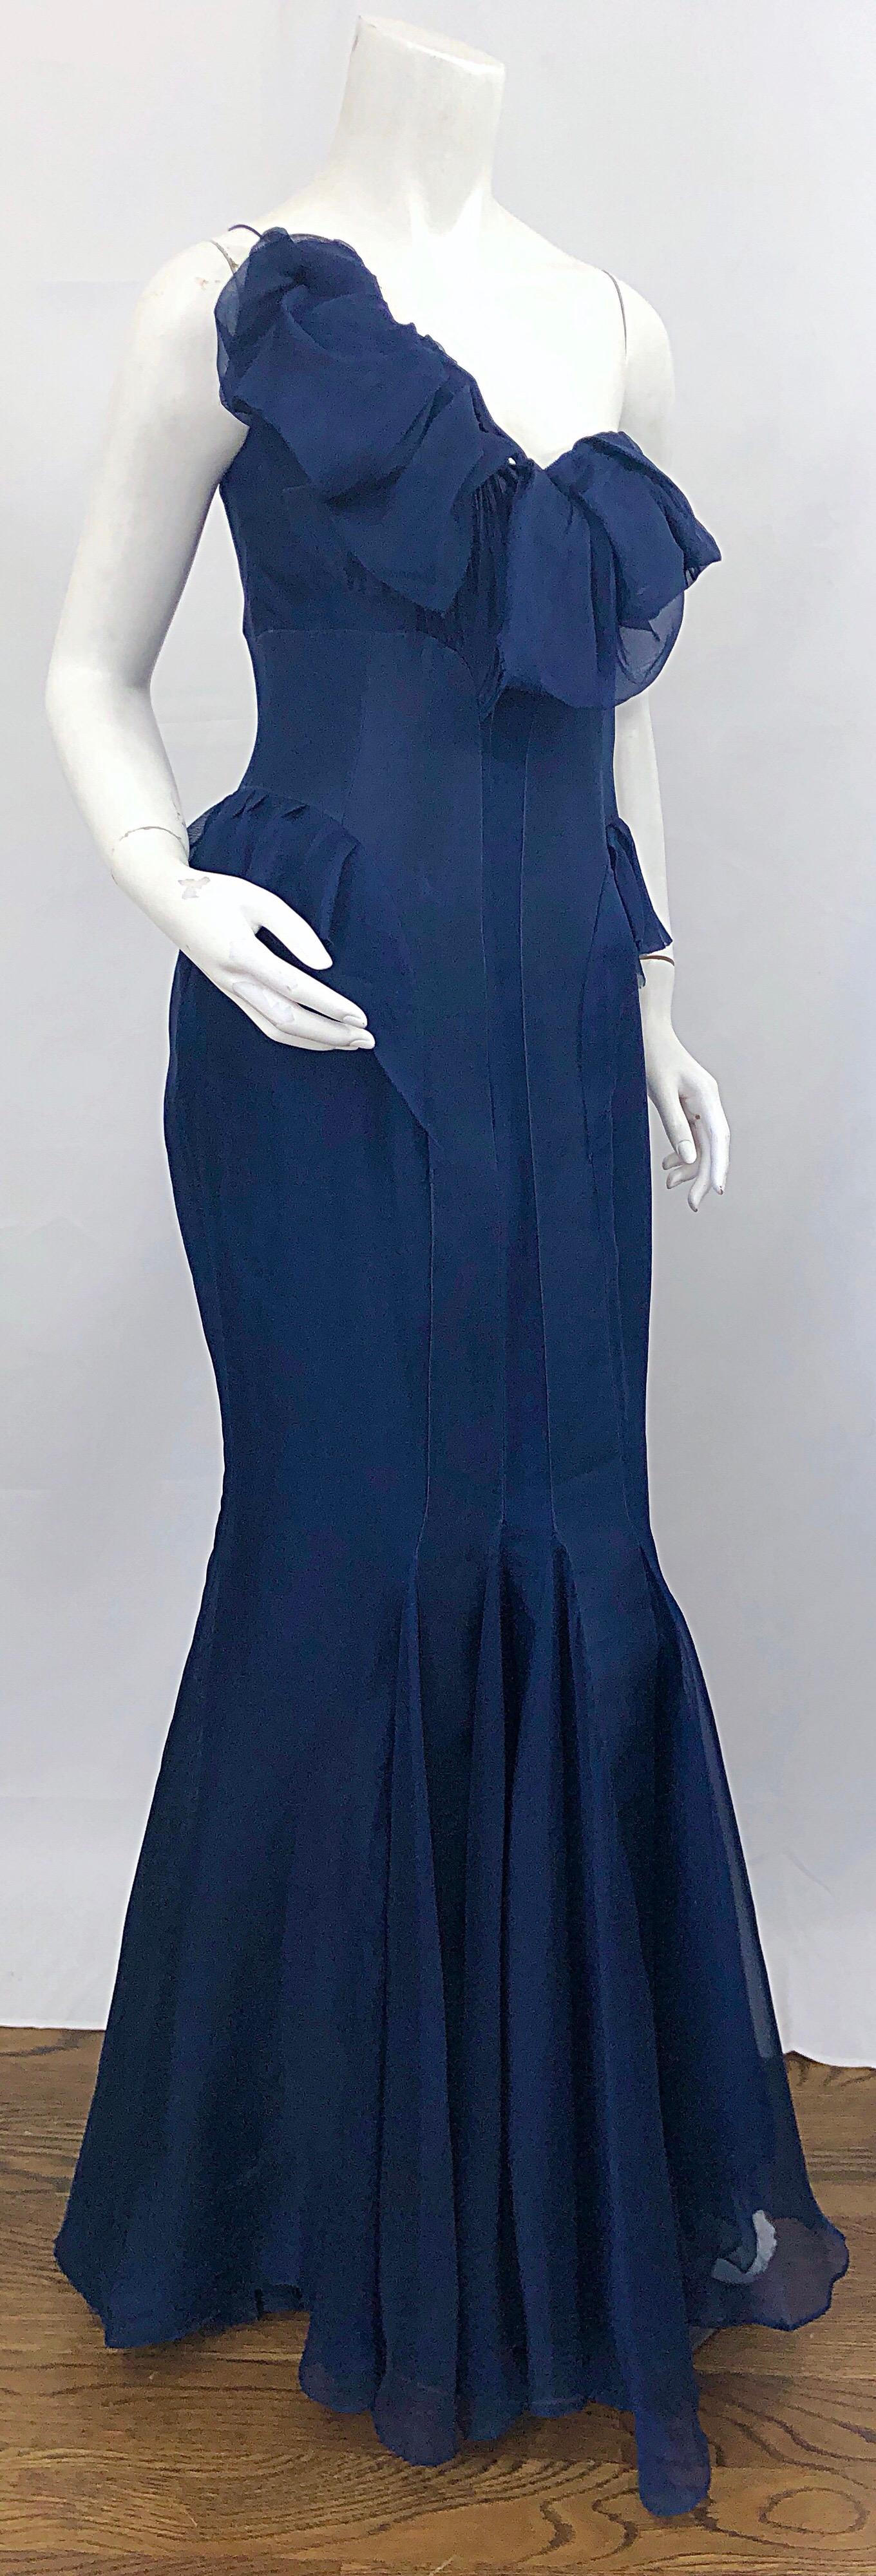 2000s J. Mendel Couture Size 4 Navy Blue Silk Chiffon One Shoulder Mermaid Gown  For Sale 2